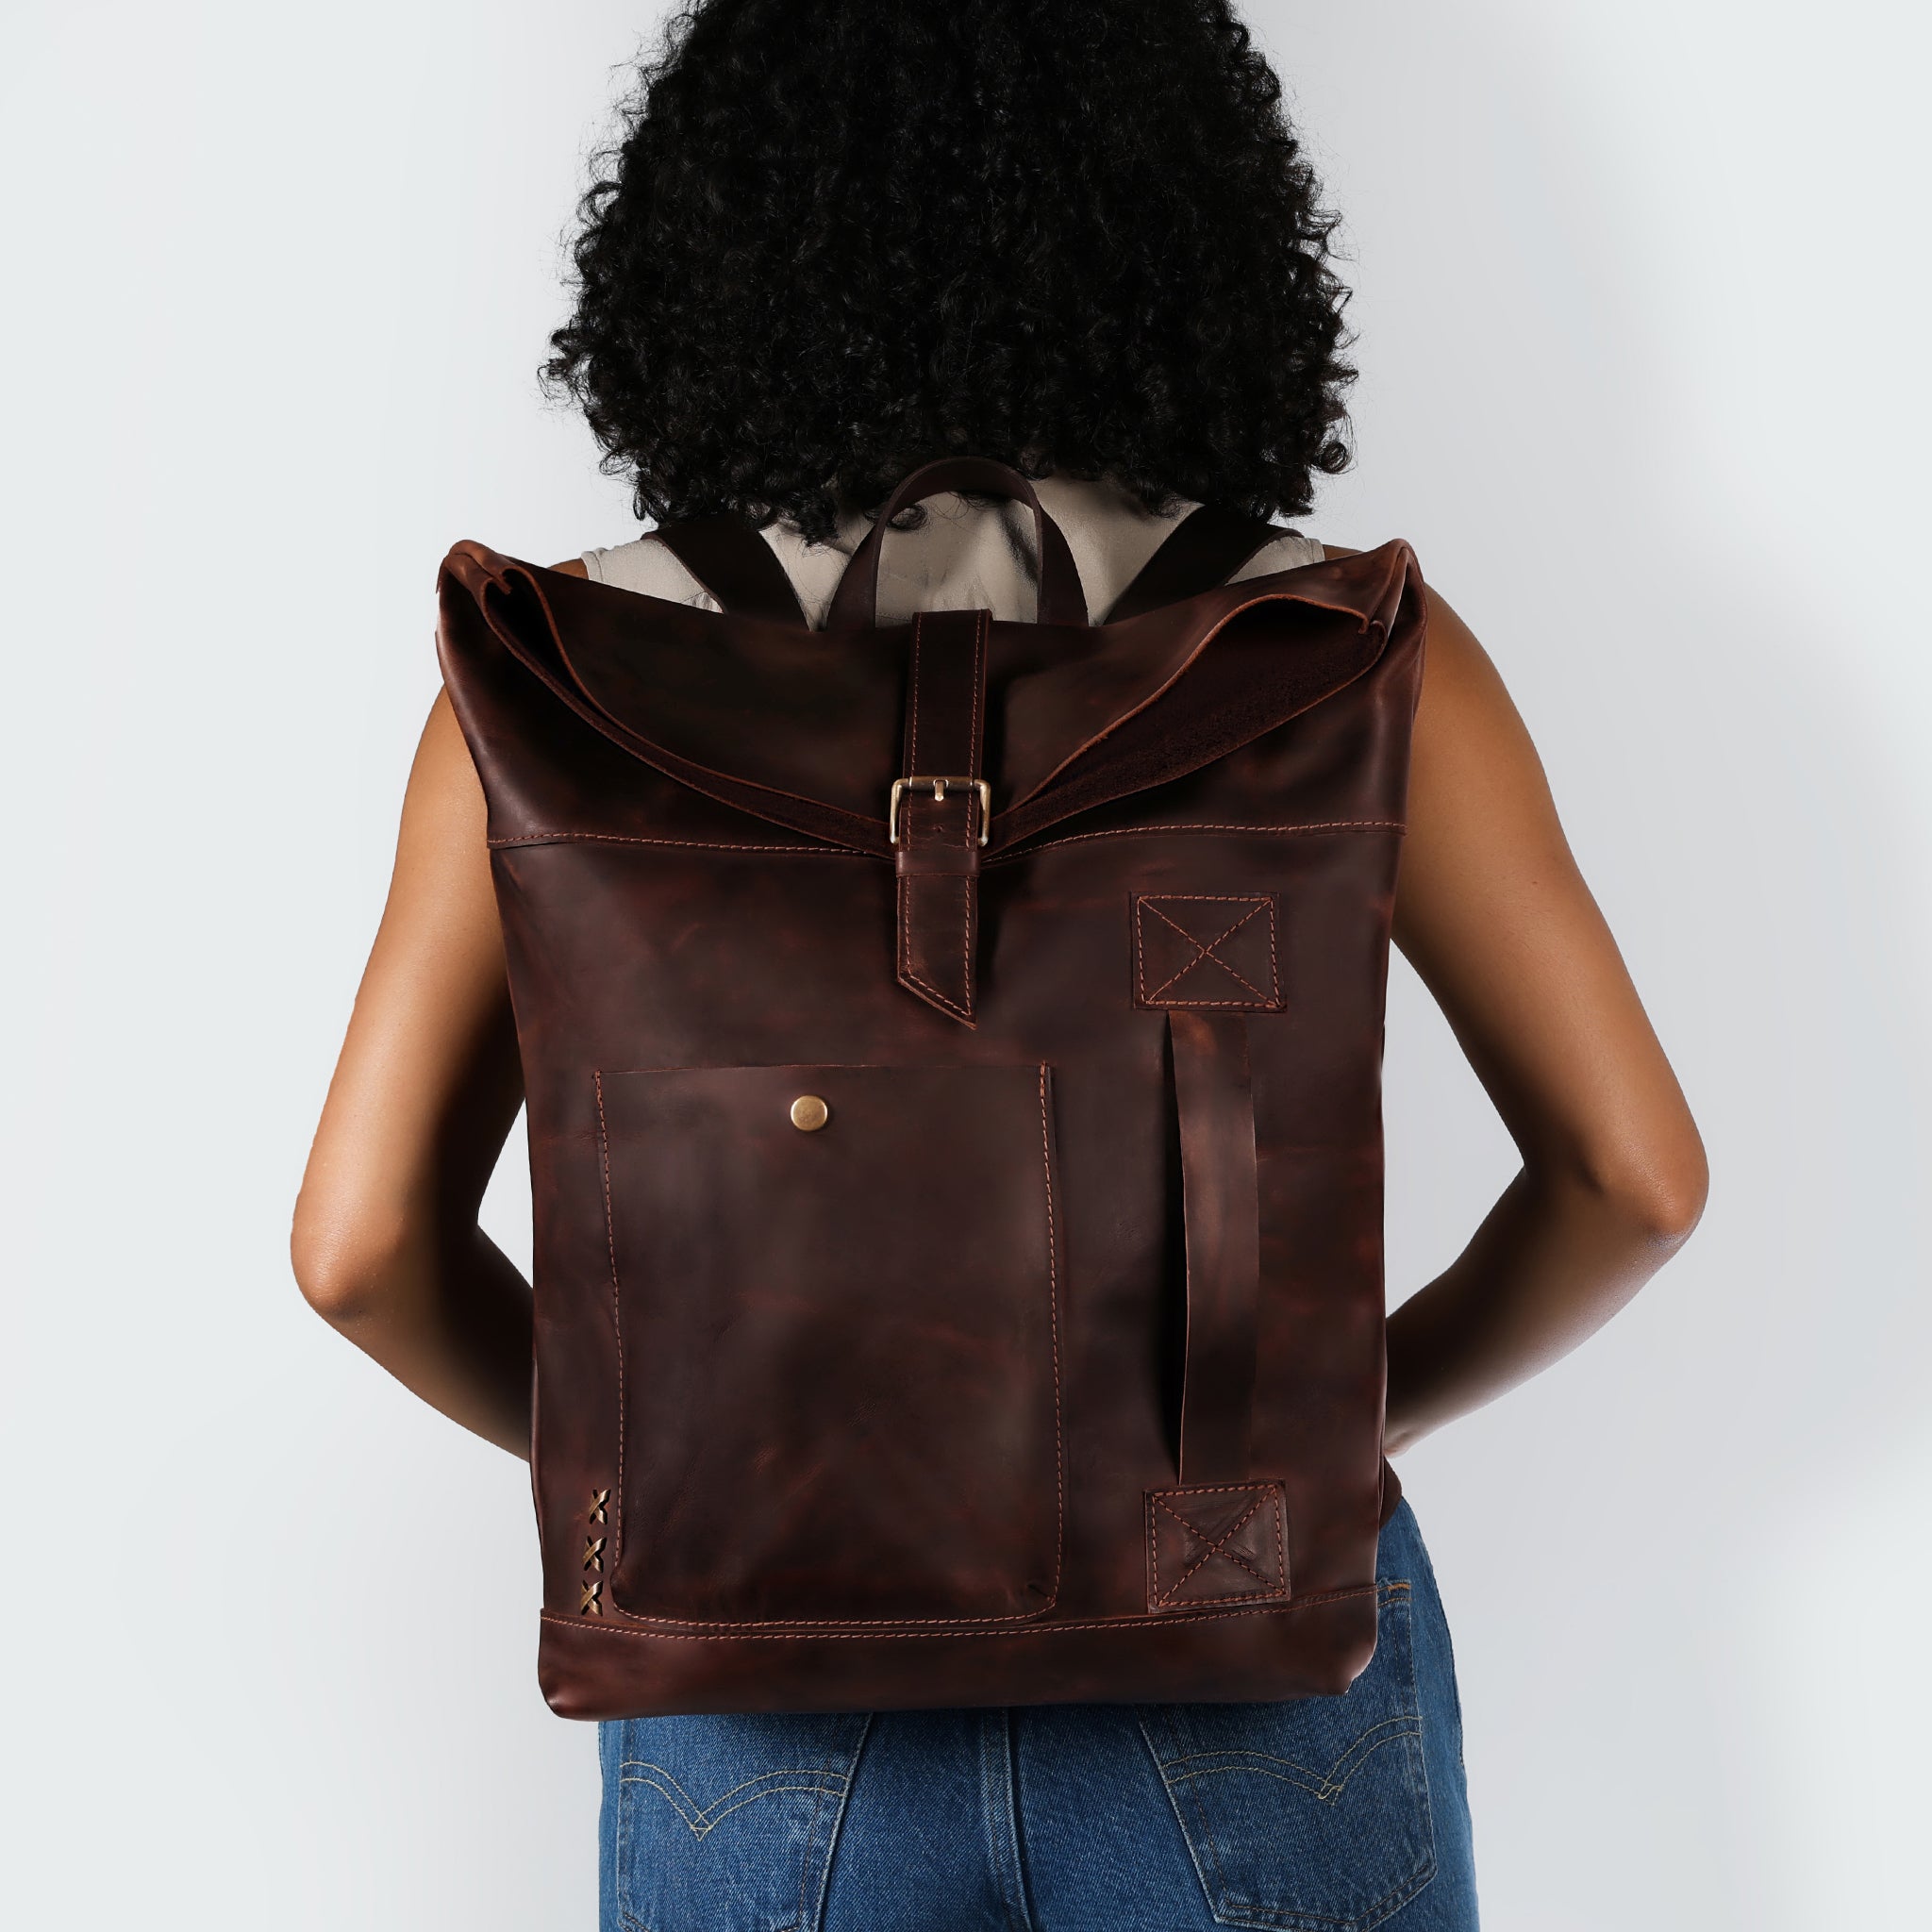 Roll-Top Handcrafting ,Women's Leather Backpack  -  Wanderlust 13-16 inch. laptops